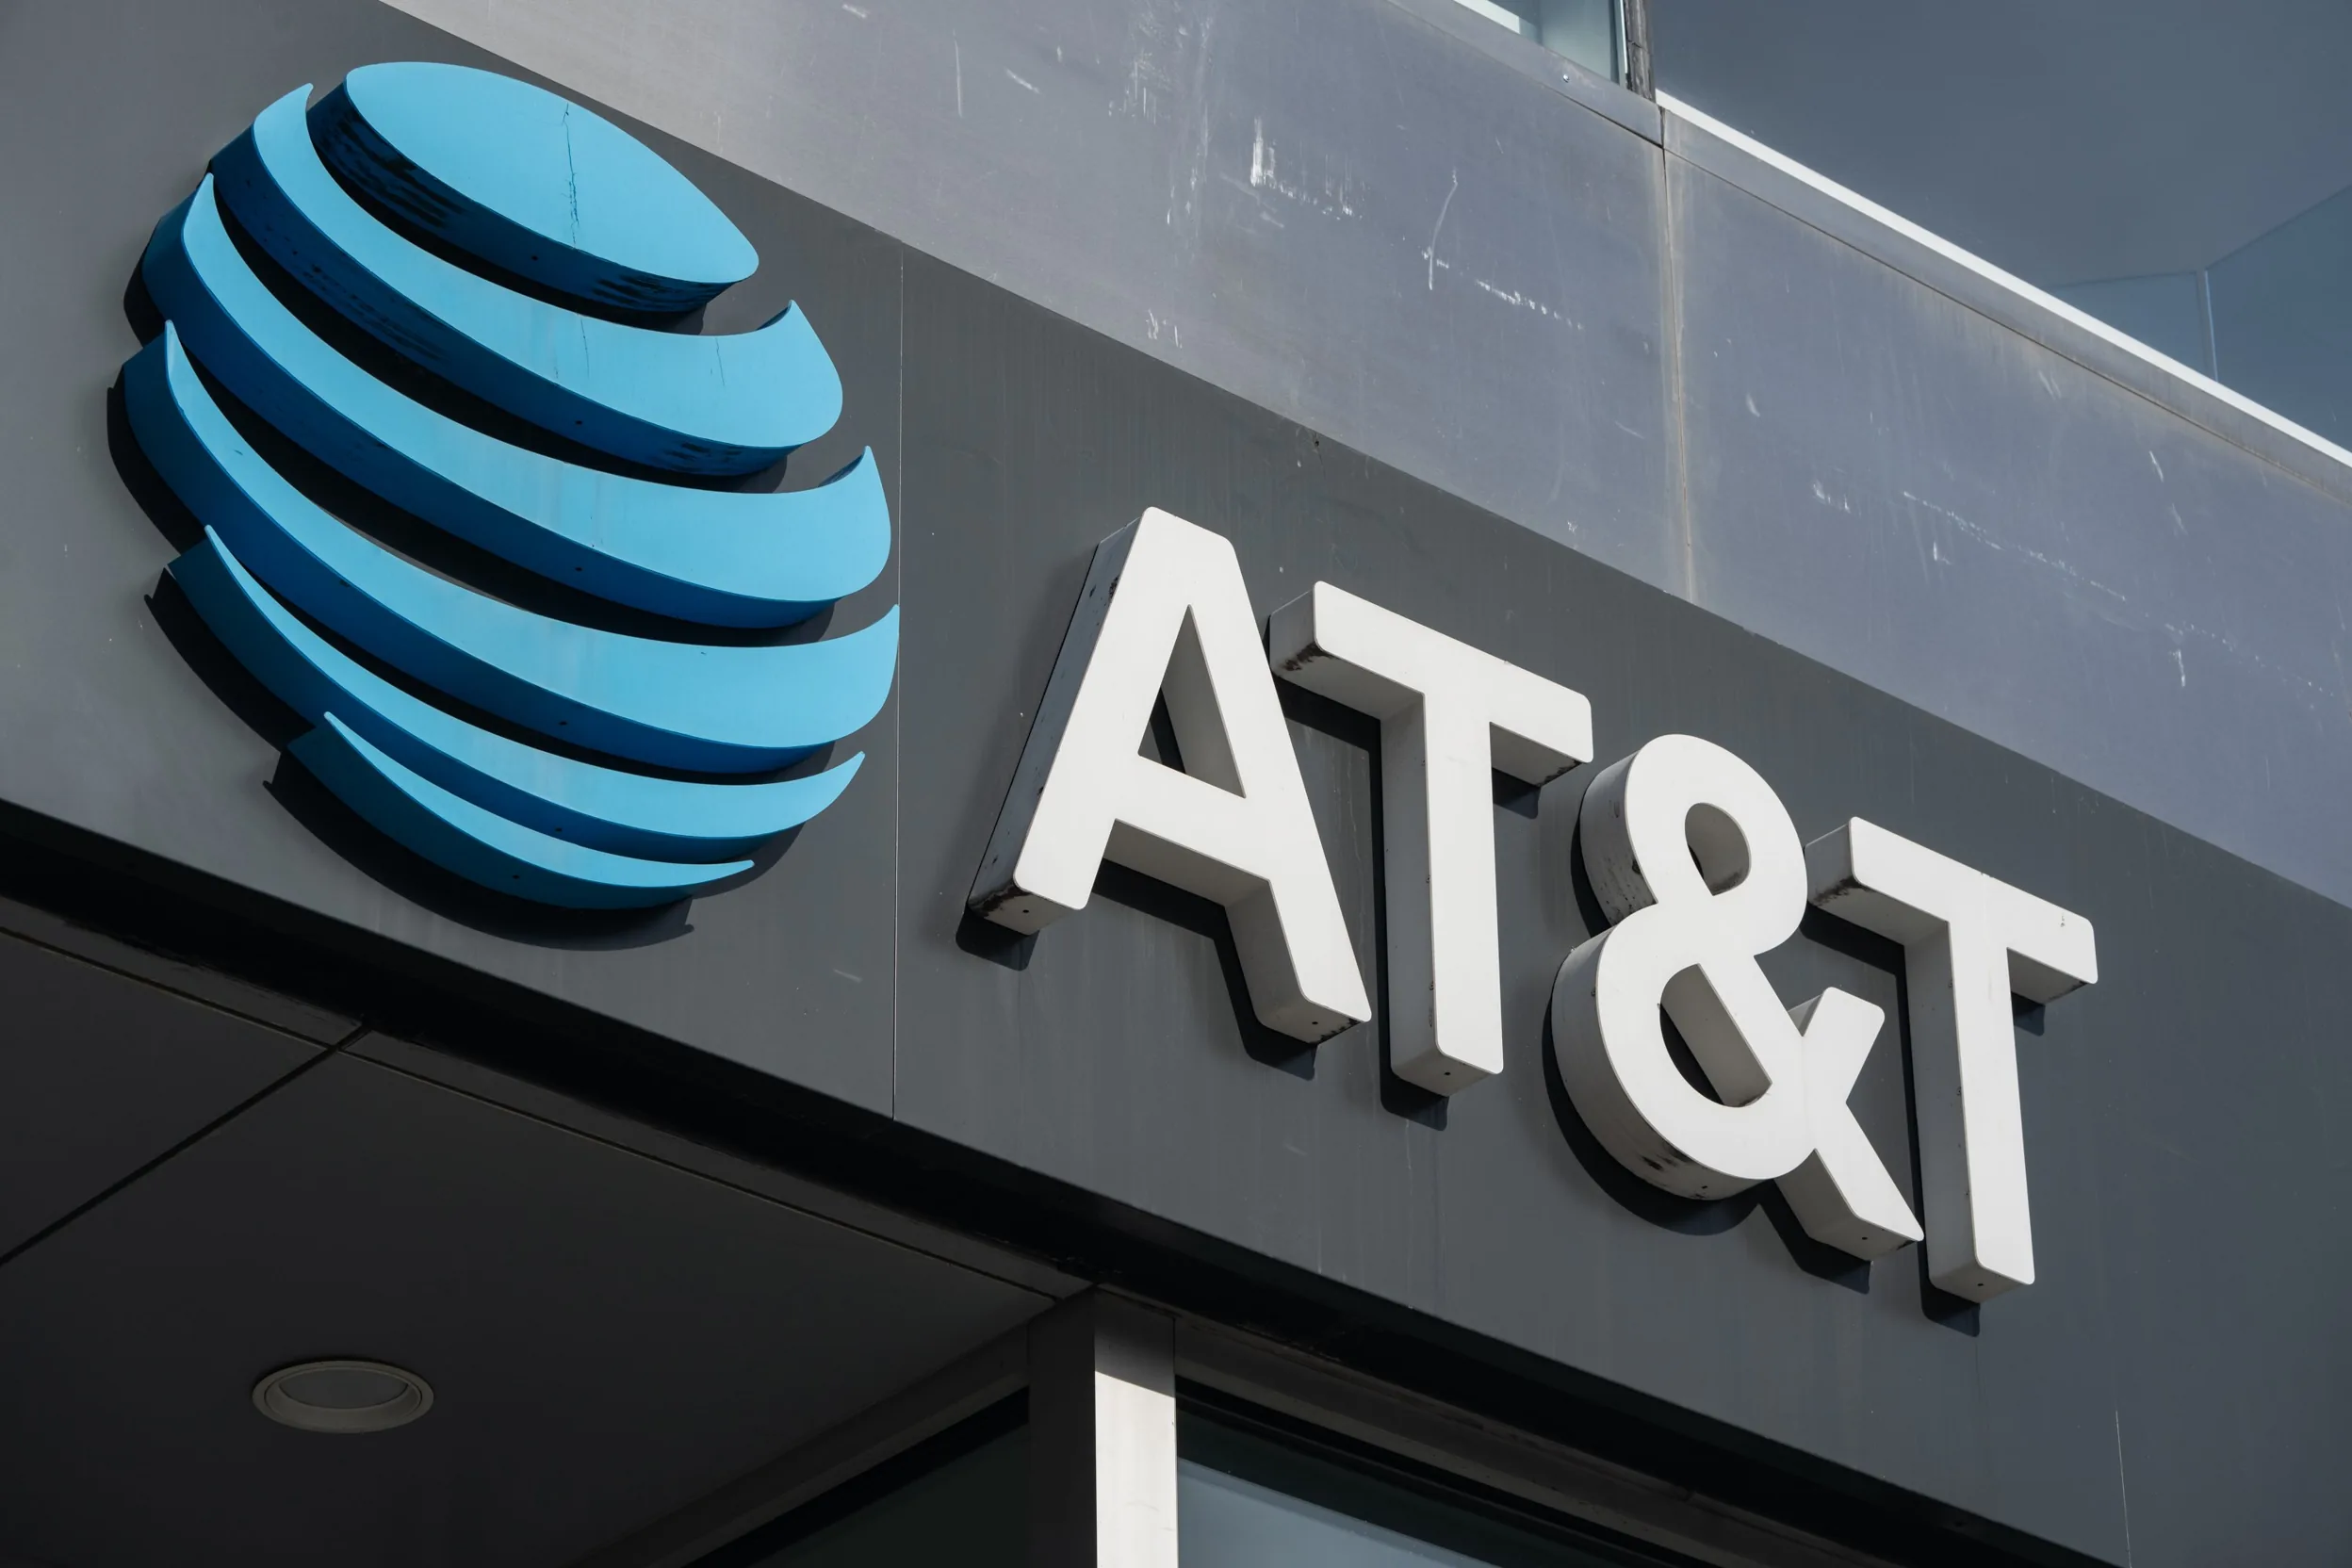 AT&T Credit Customers with $5 After Nationwide Network Outage